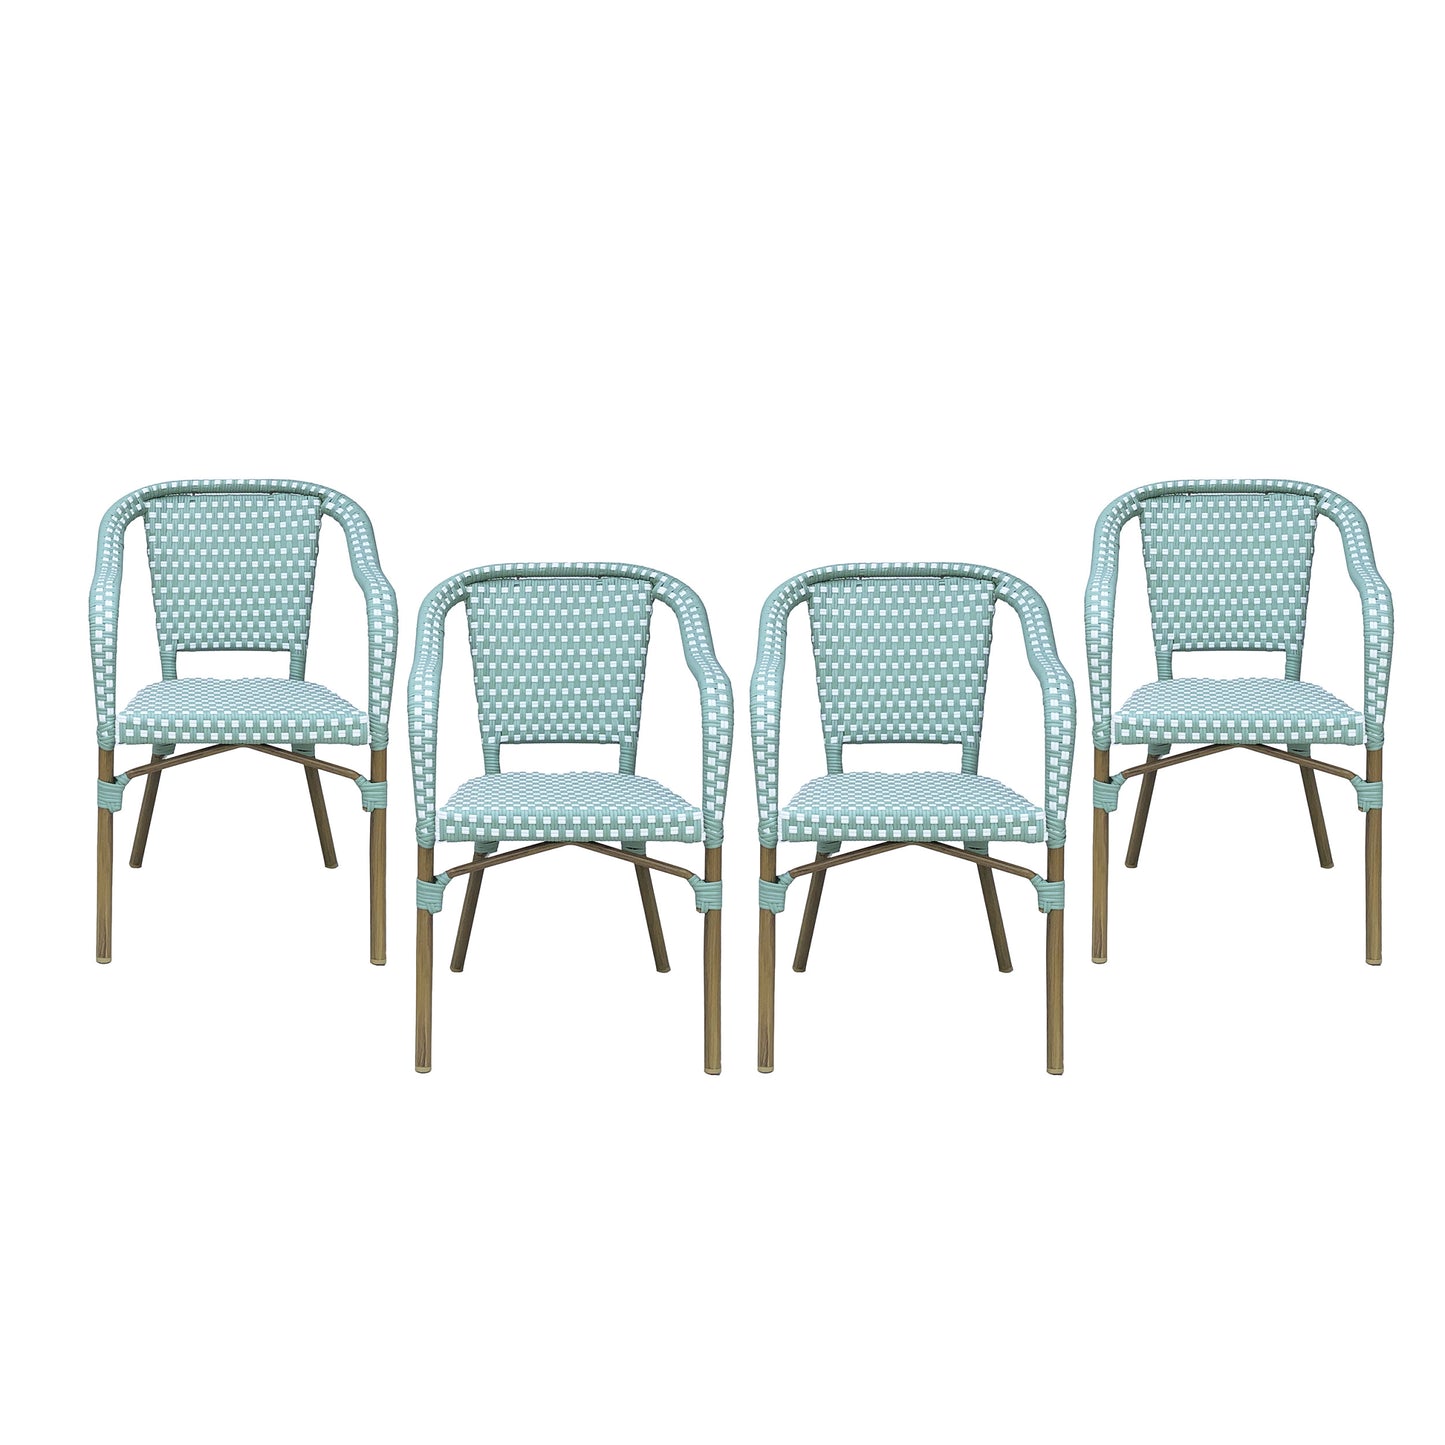 Grouse Outdoor French Bistro Chairs, Set of 4